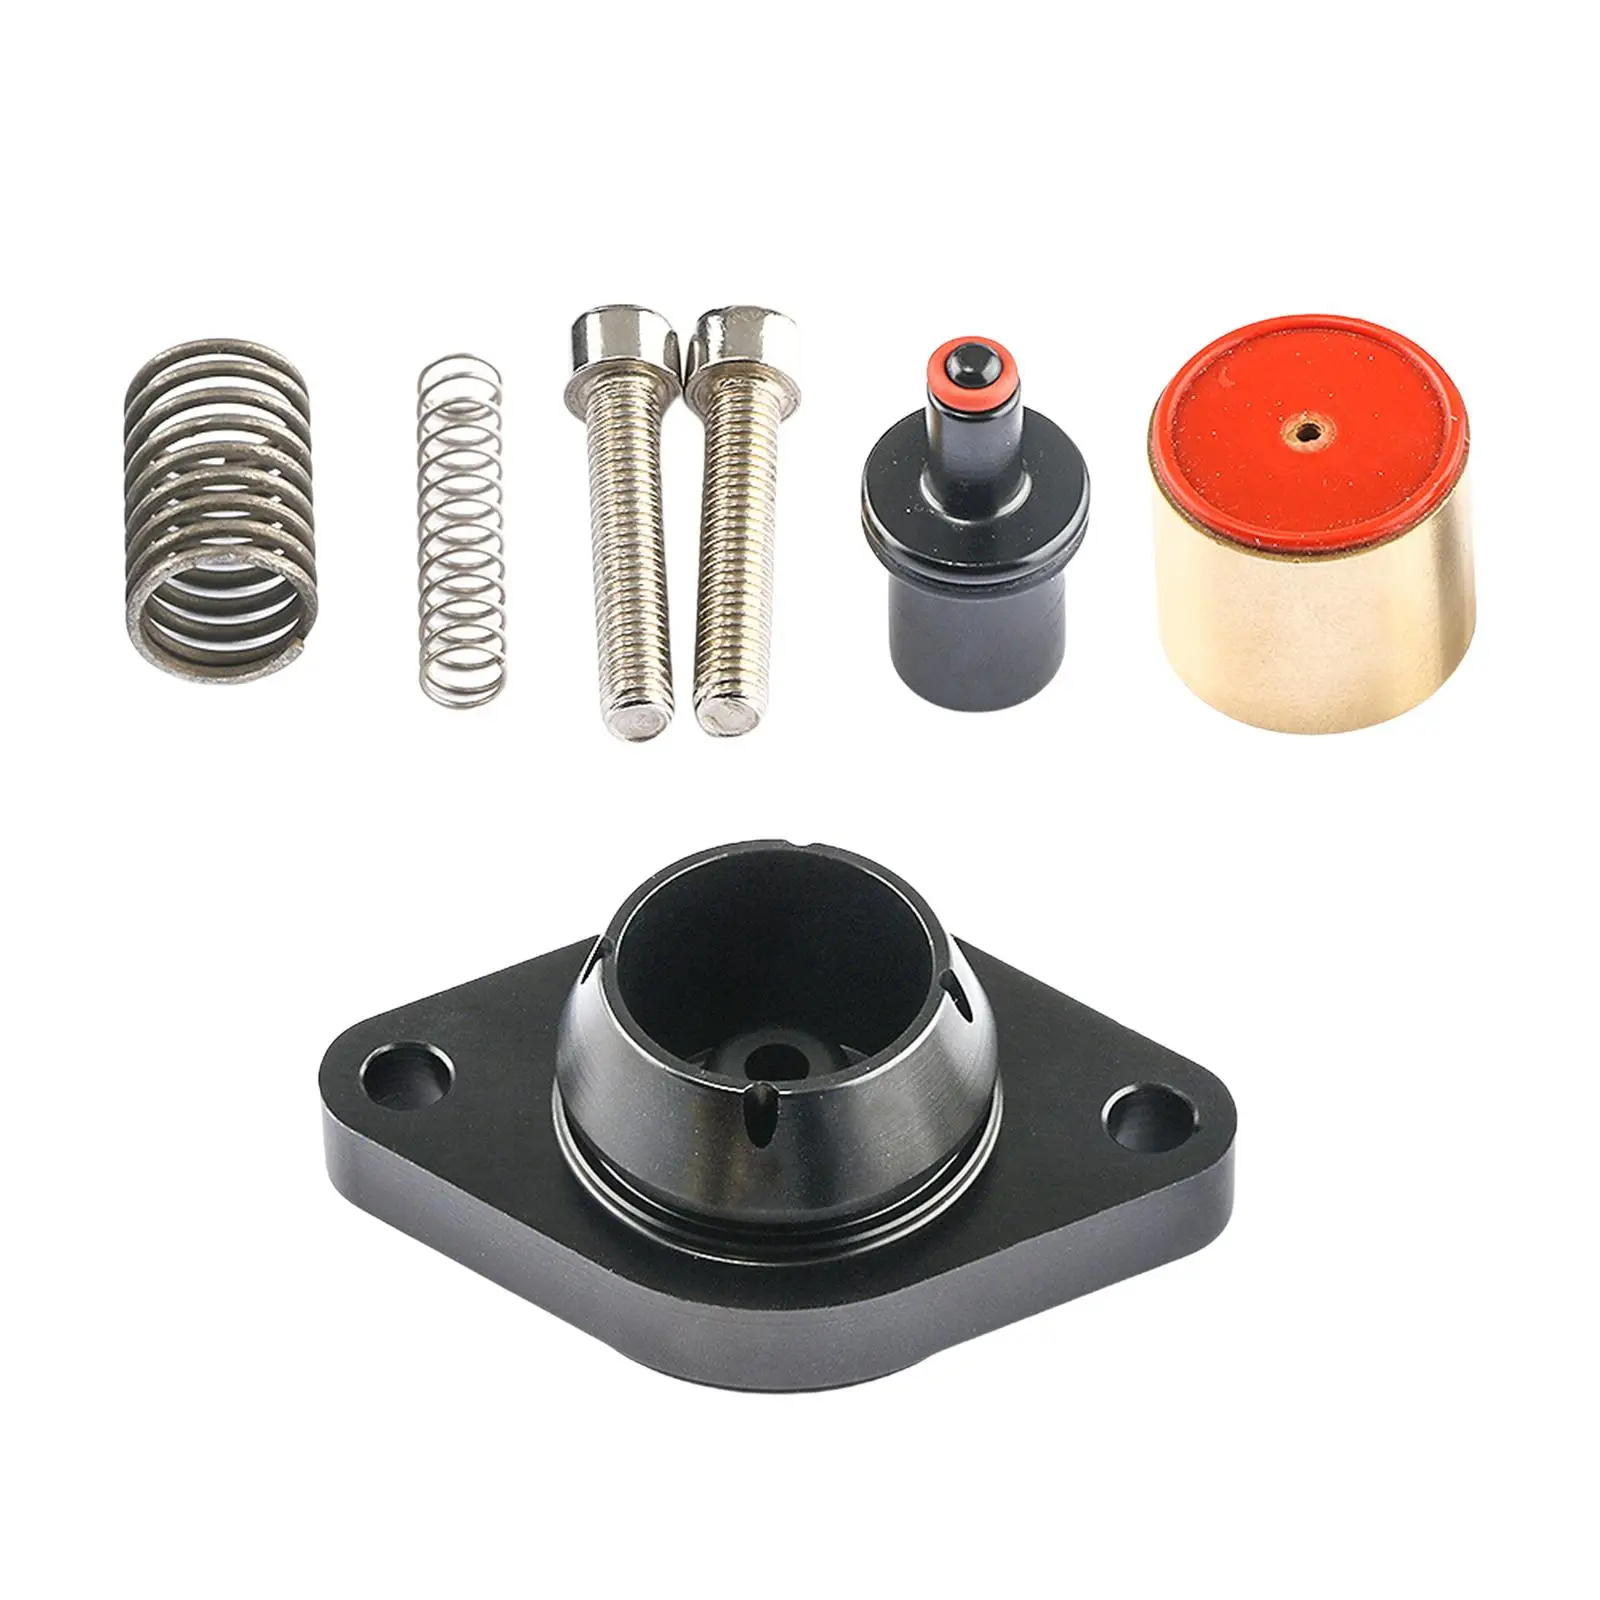 Pressure Relief Valve Base, Gfb T9355, Replacement Accessories, Spare Parts, for VW Jetta, 1.4 Tsi Twin Charged Engines